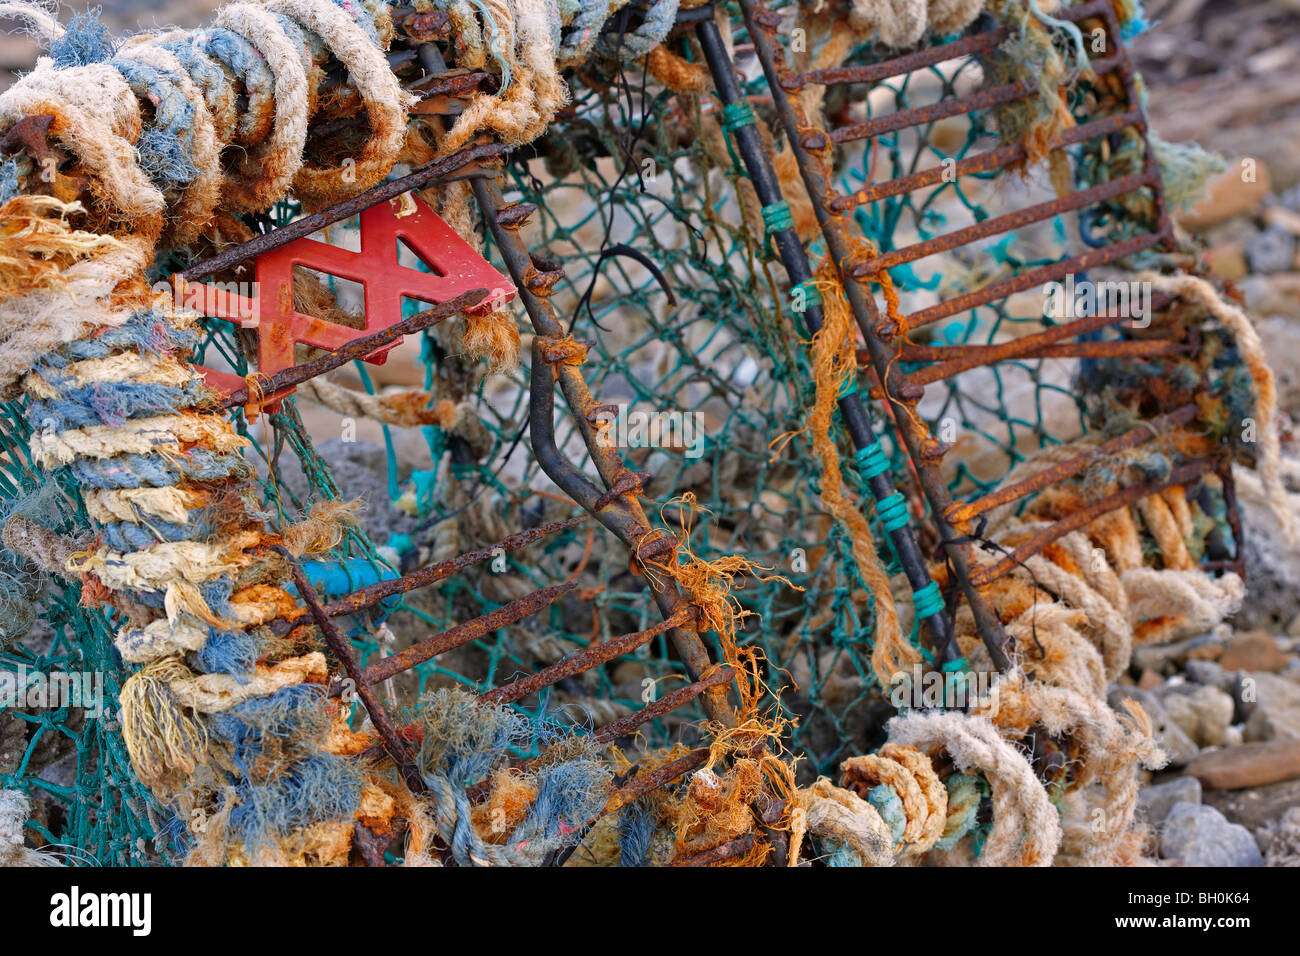 Detail on a broken lobster pot washed up on a beach Stock Photo